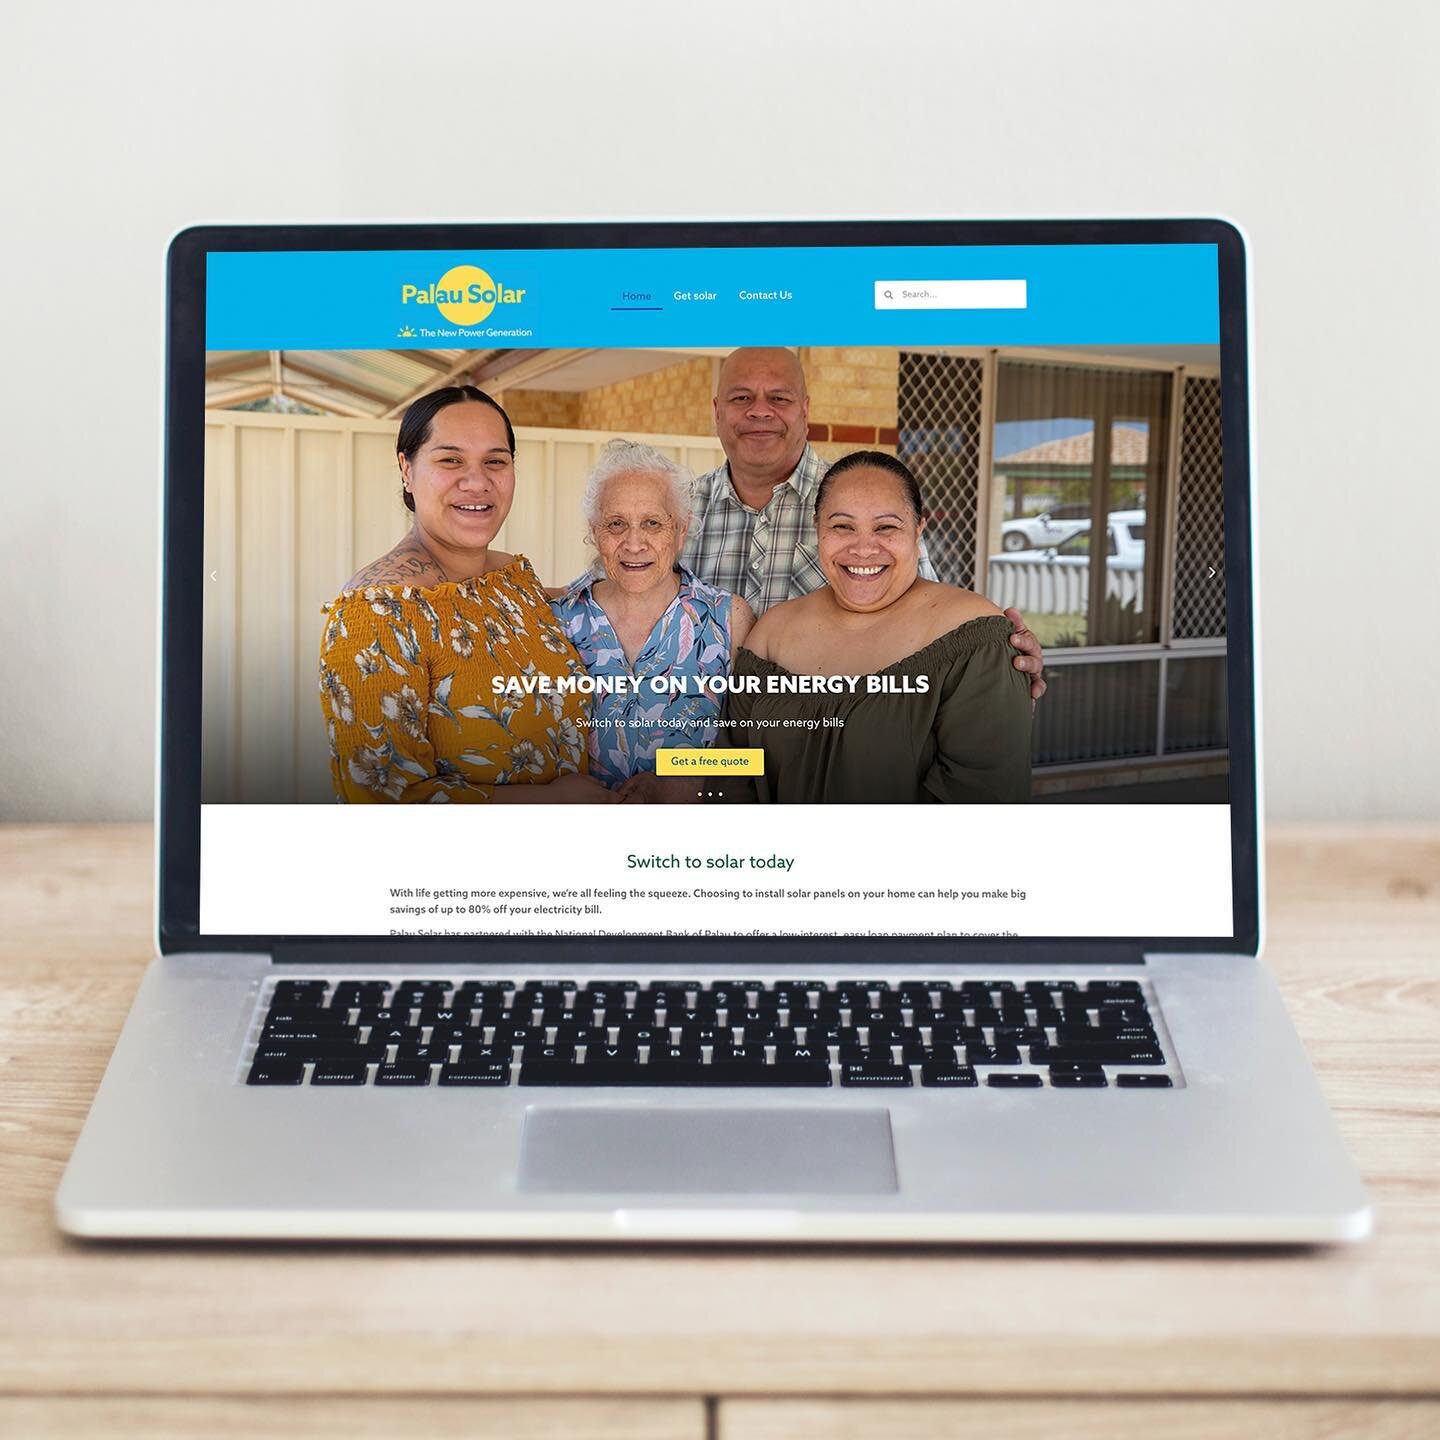 Web design and build, signage, banners and branding update for Palau Solar - a scheme to help people switch from generators to solar power on the island of Palau. Working with marketing legend, Jo McLean 🇵🇼 
.
.
#palausolar #renewableenergy #solarp